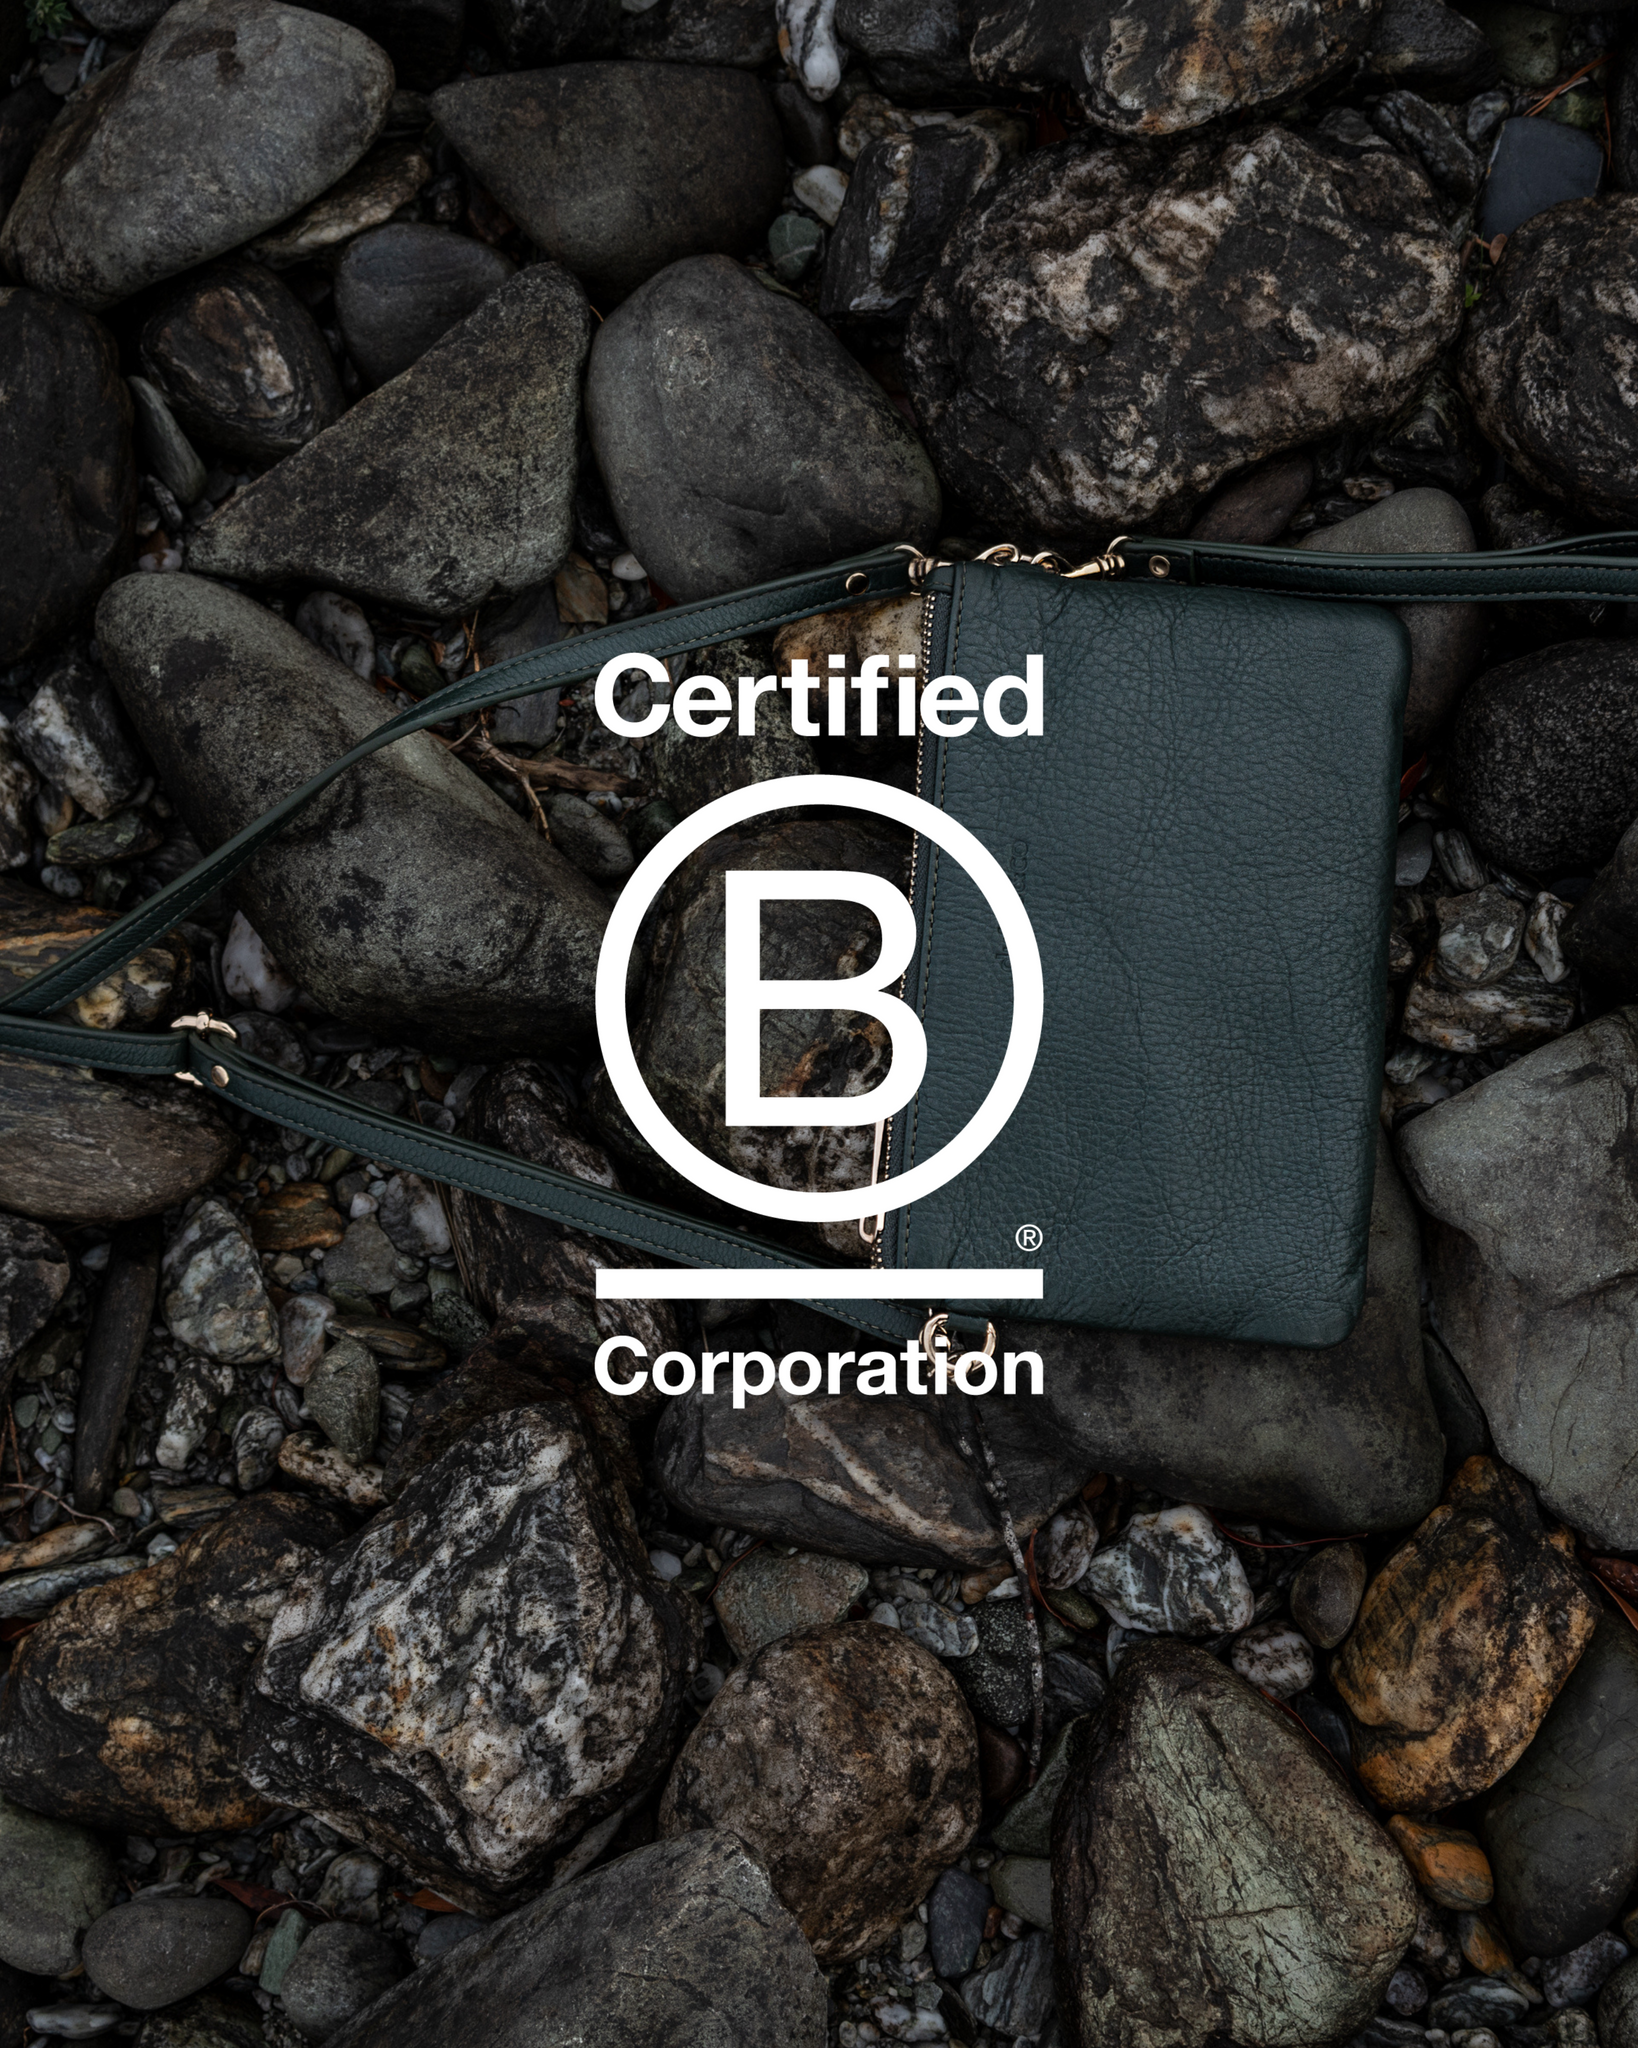 Duffle&cO ARE A CERTIFIED b Corp business